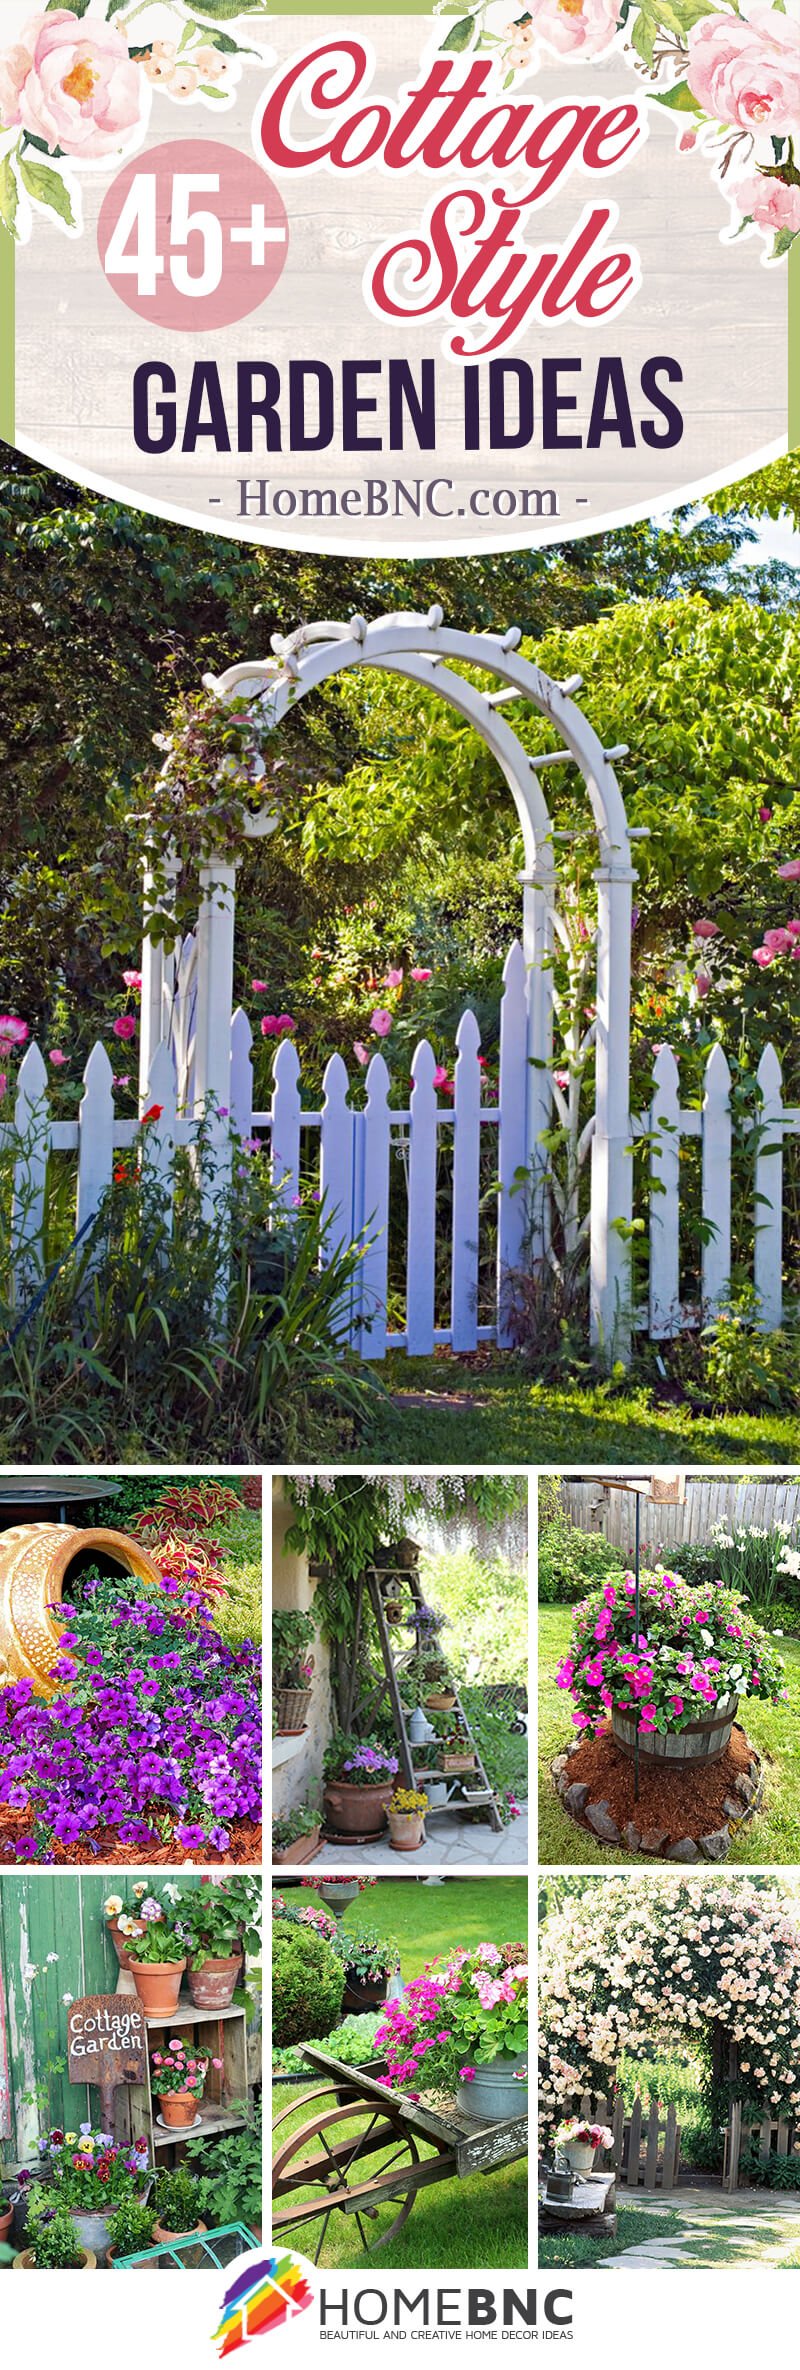 20+ Best Cottage Style Garden Ideas and Designs for 20